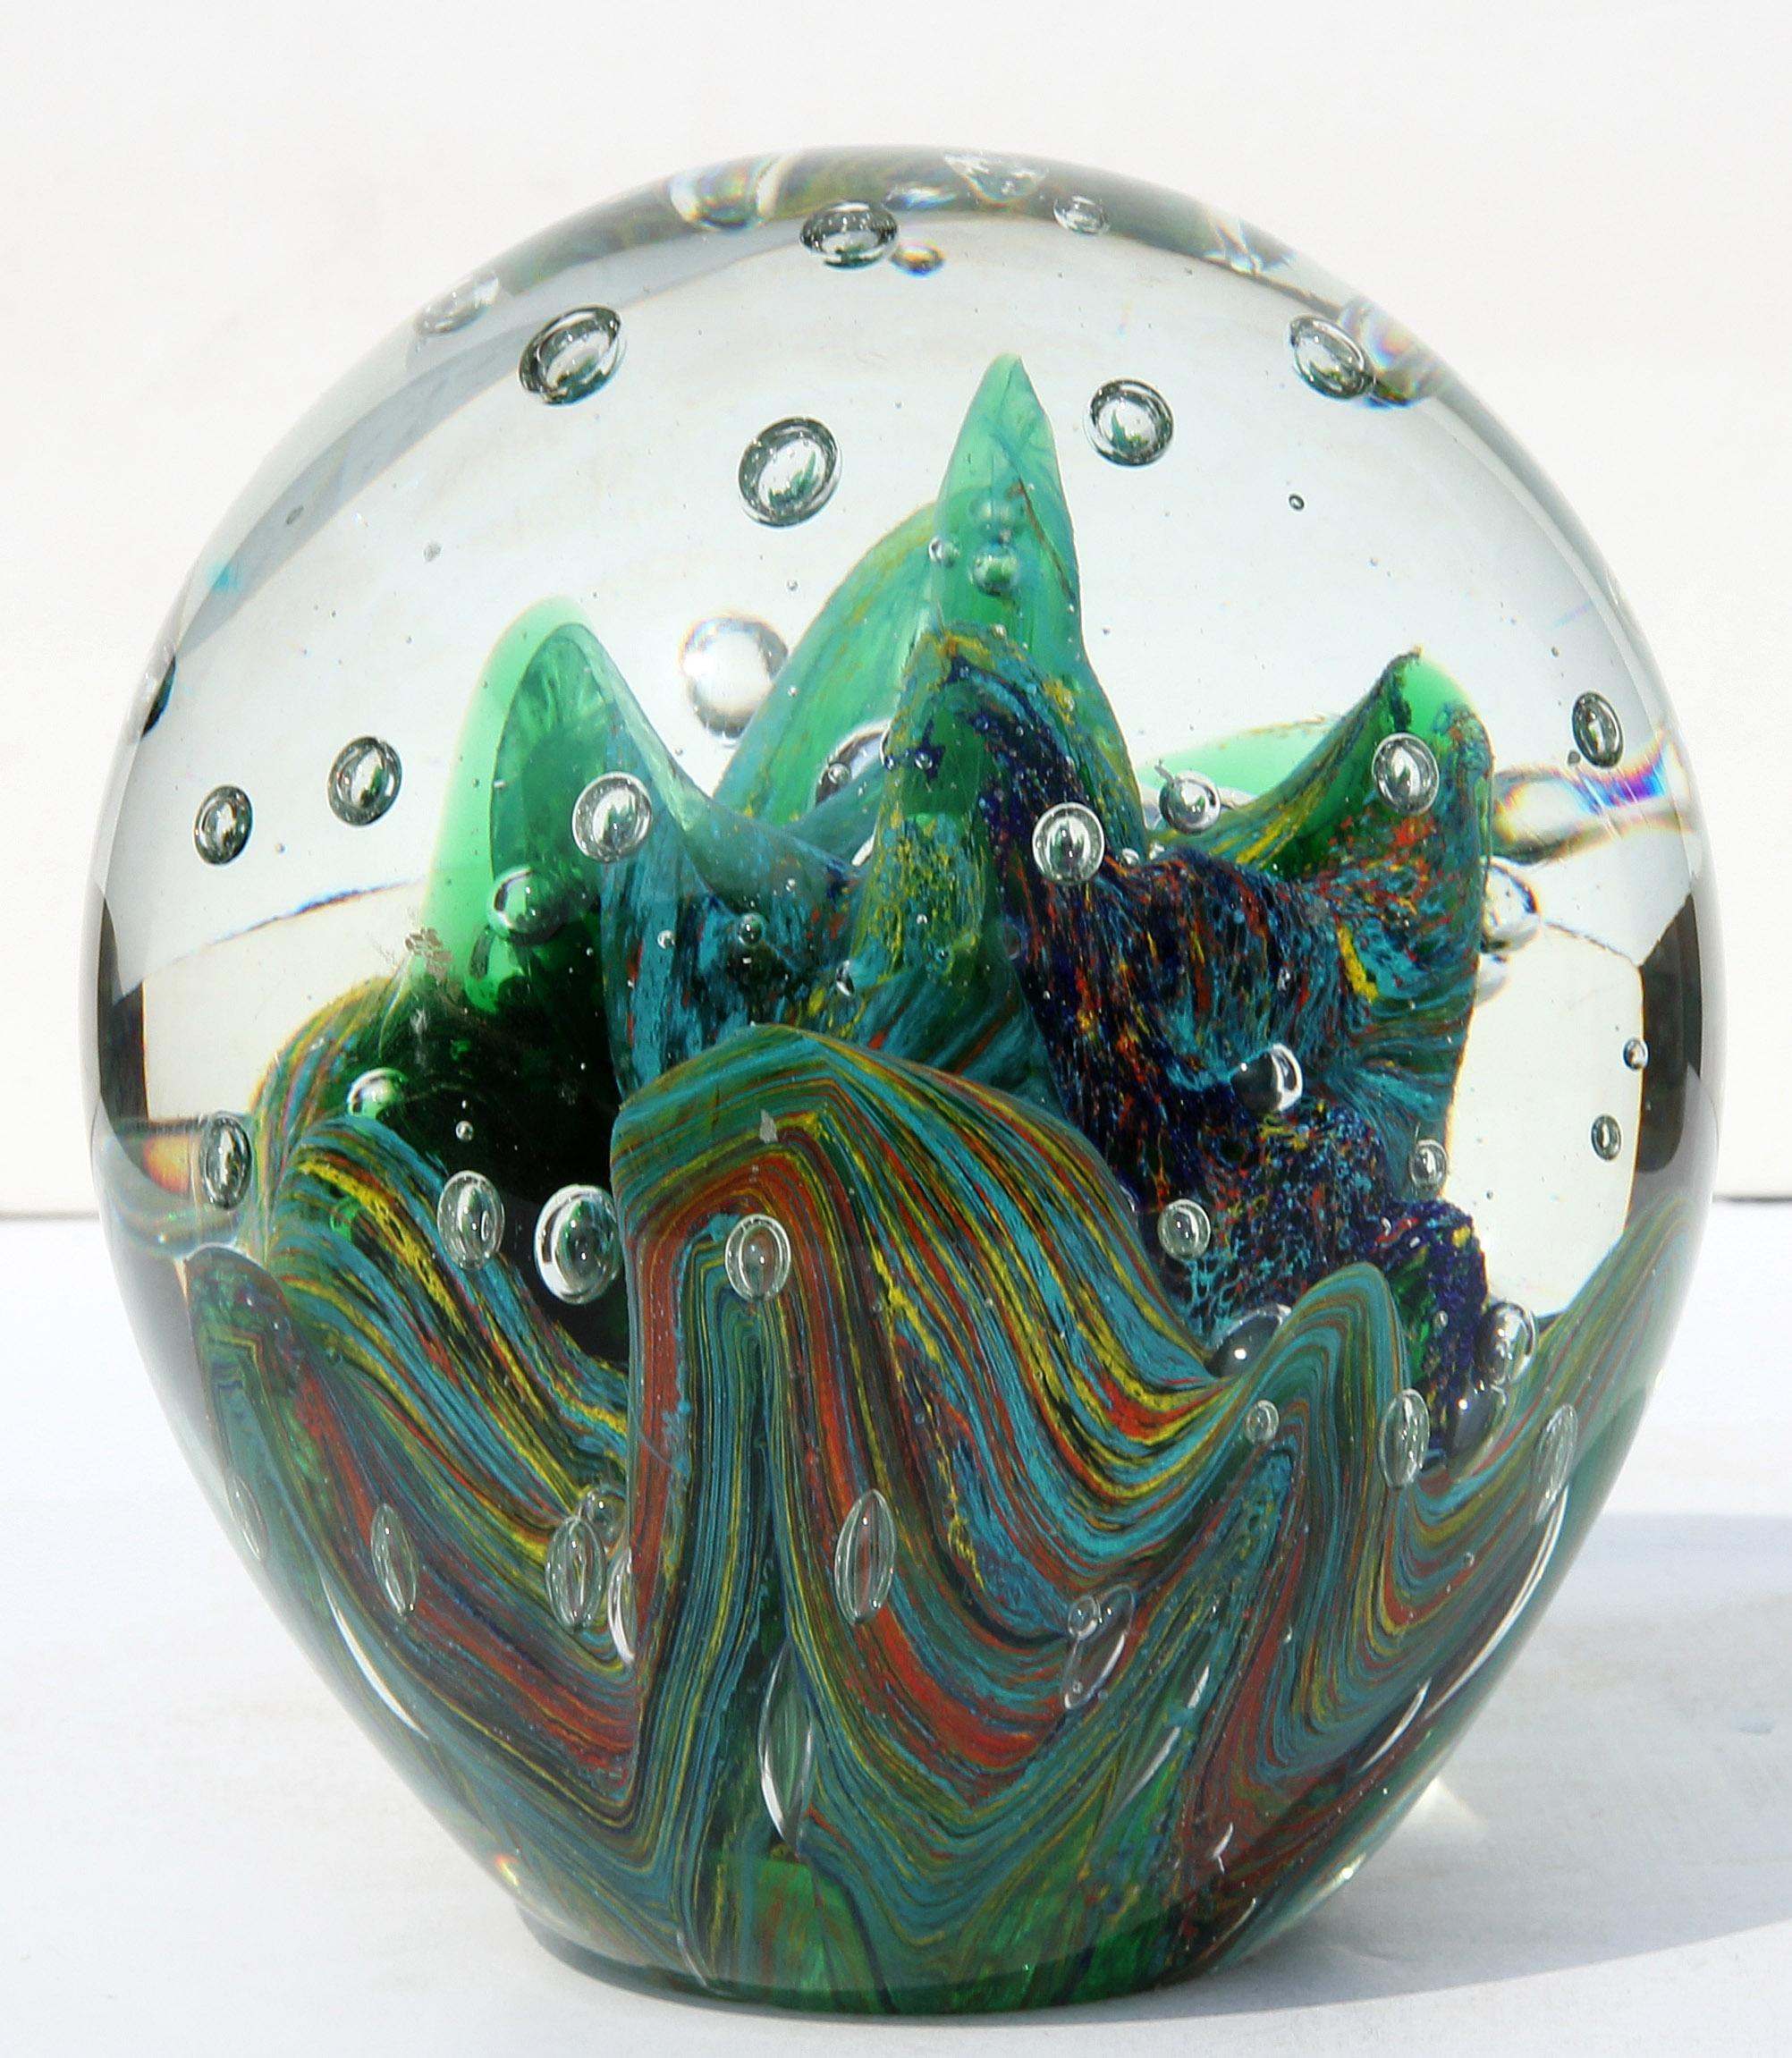 Vintage colorful Italian glass paperweight.